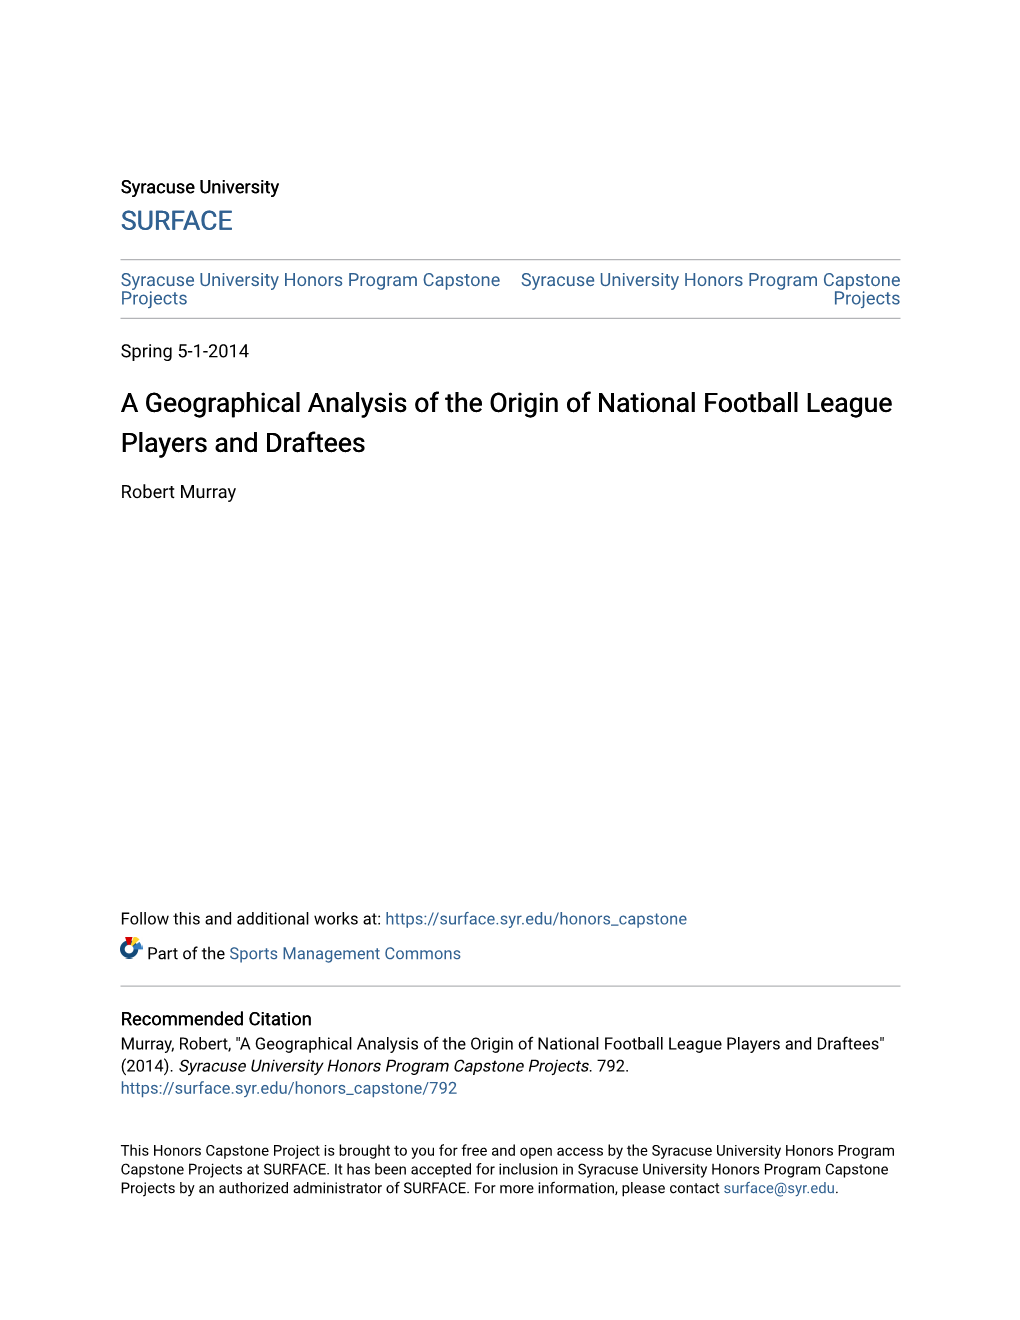 A Geographical Analysis of the Origin of National Football League Players and Draftees